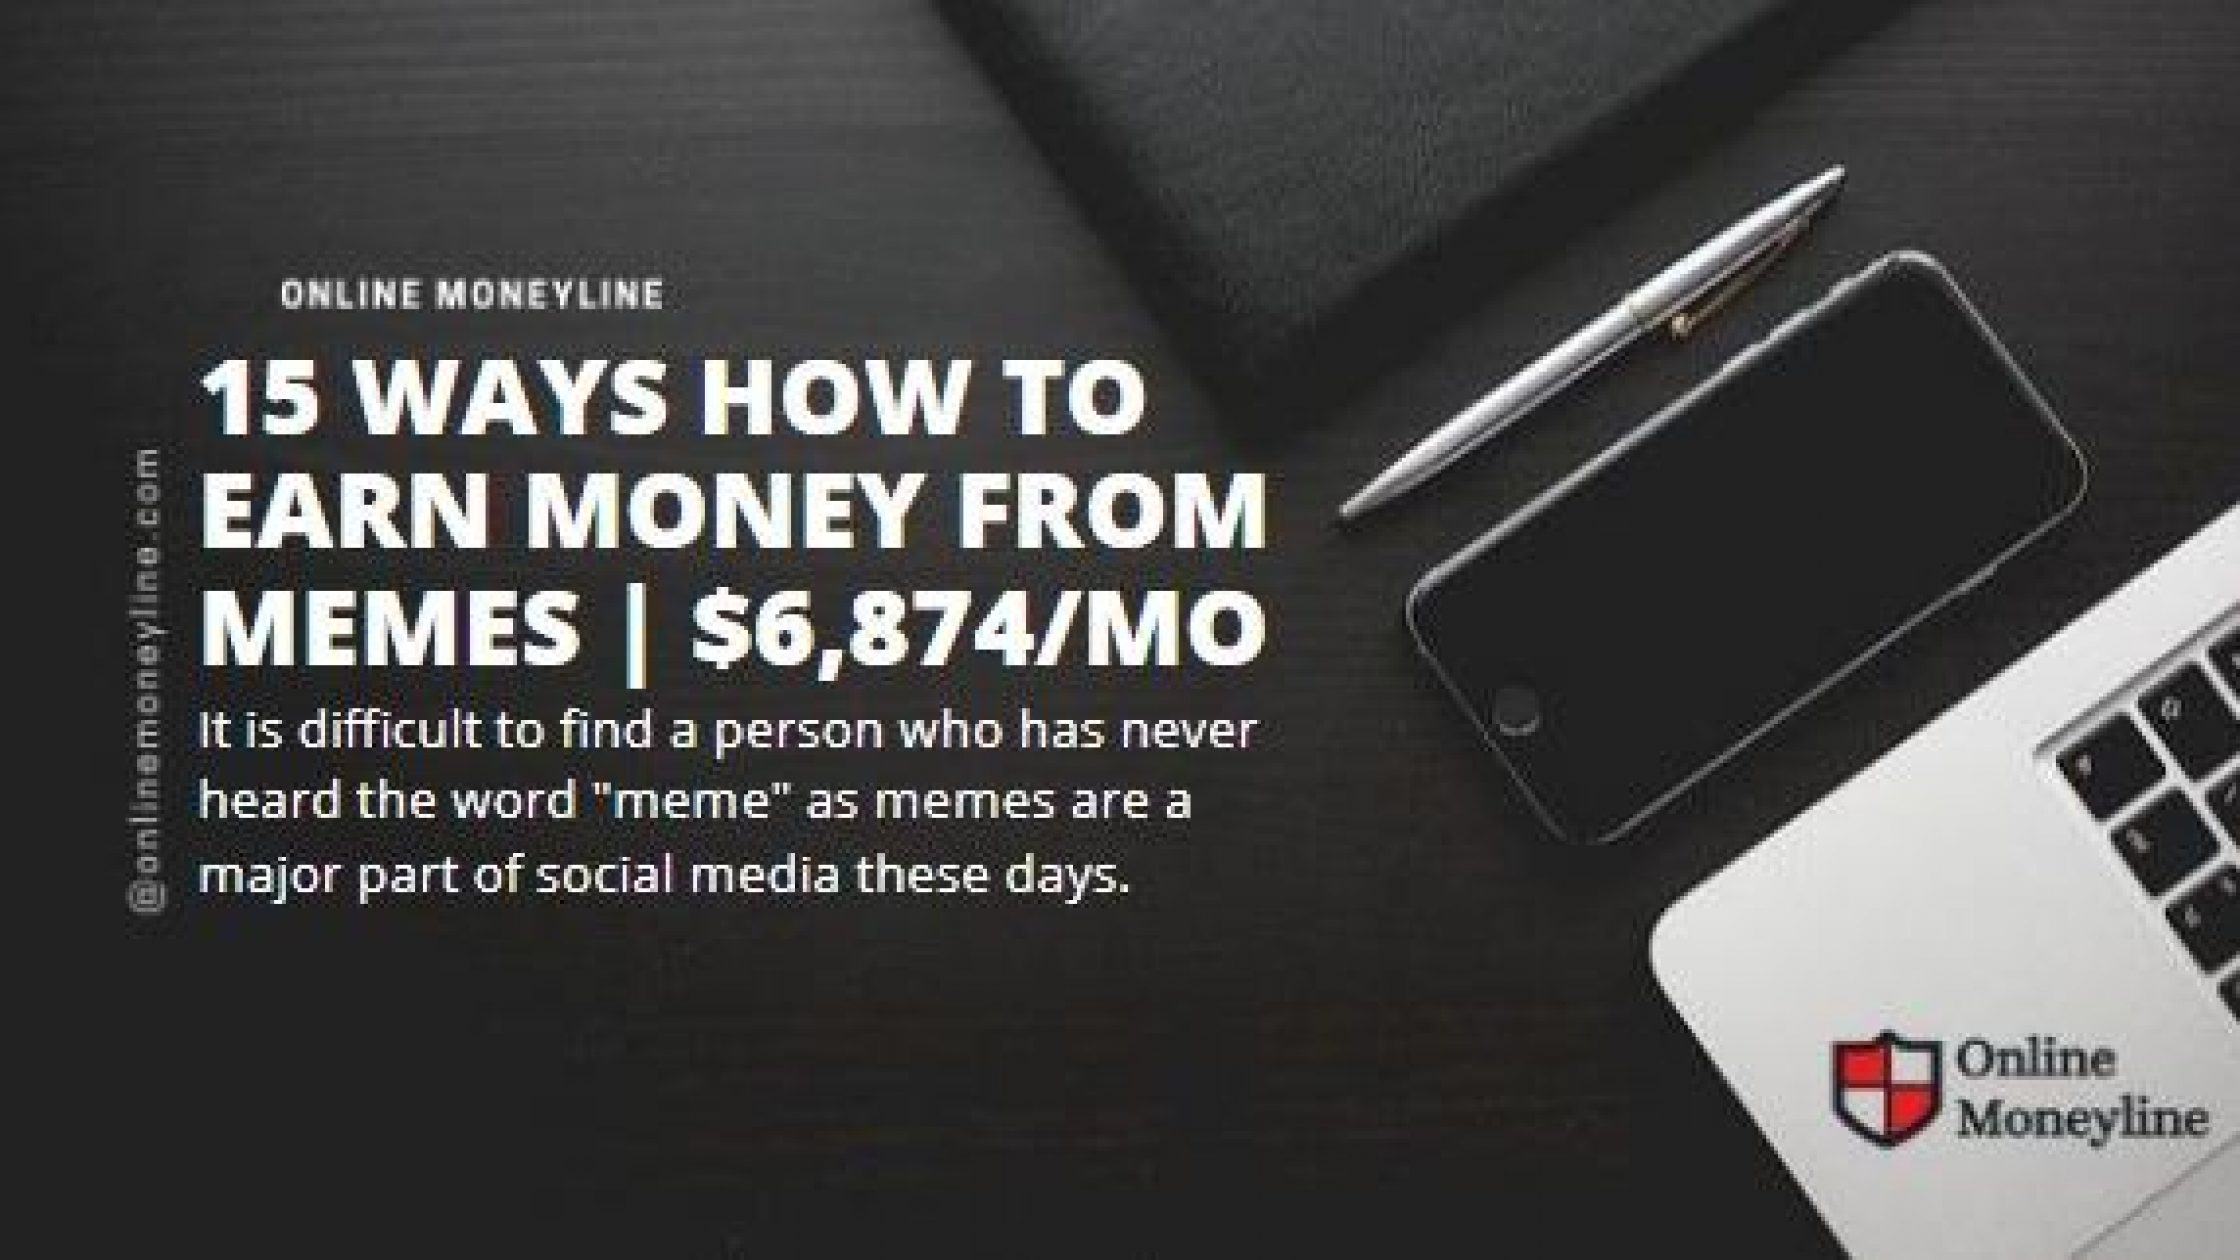 15 Ways How to Earn Money from Memes | $6,874/Mo